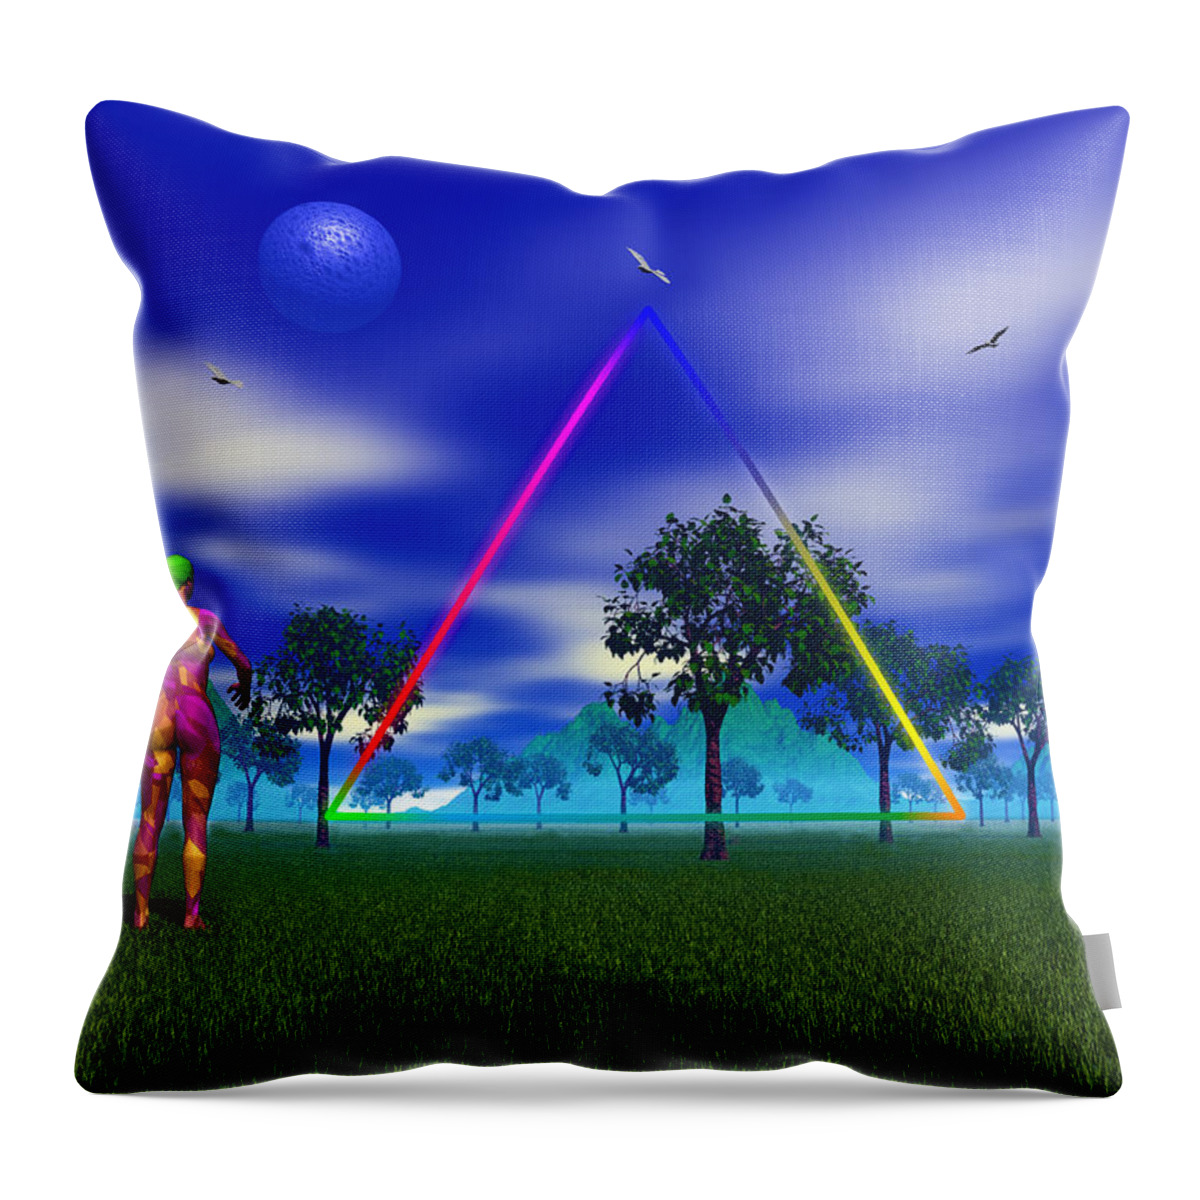 Landscape Throw Pillow featuring the photograph Triangel by Mark Blauhoefer